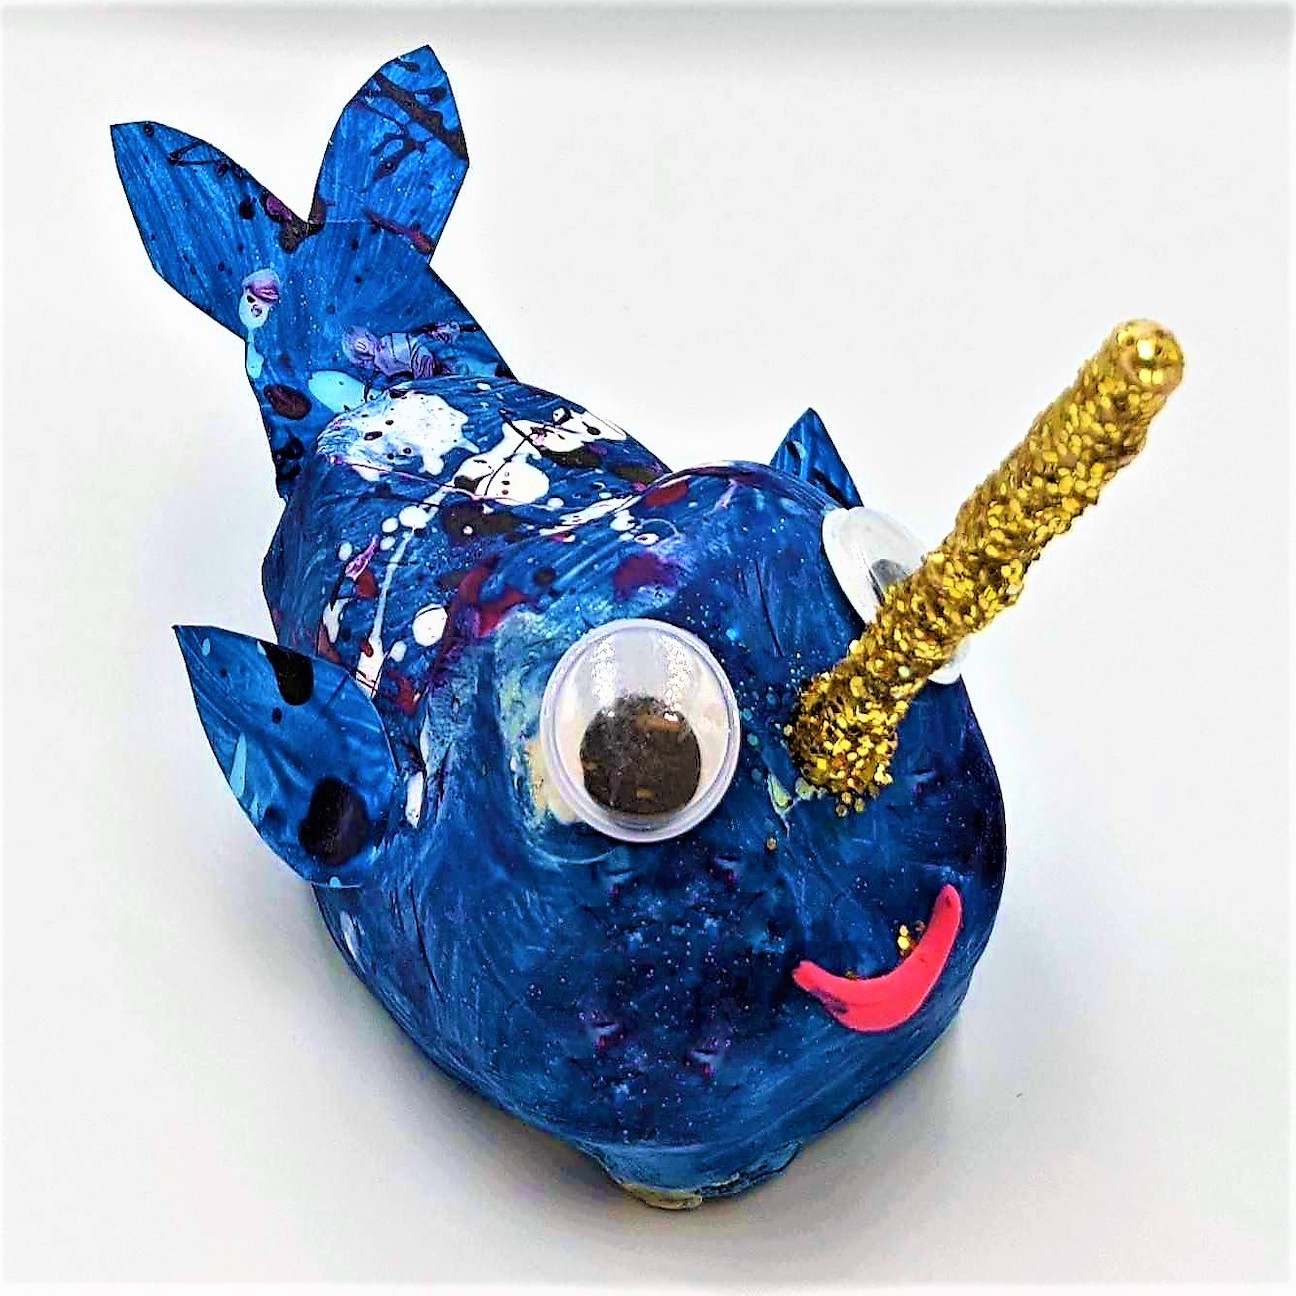 Kidcreate Studio - Houston Greater Heights, Nifty Narwhal Art Project